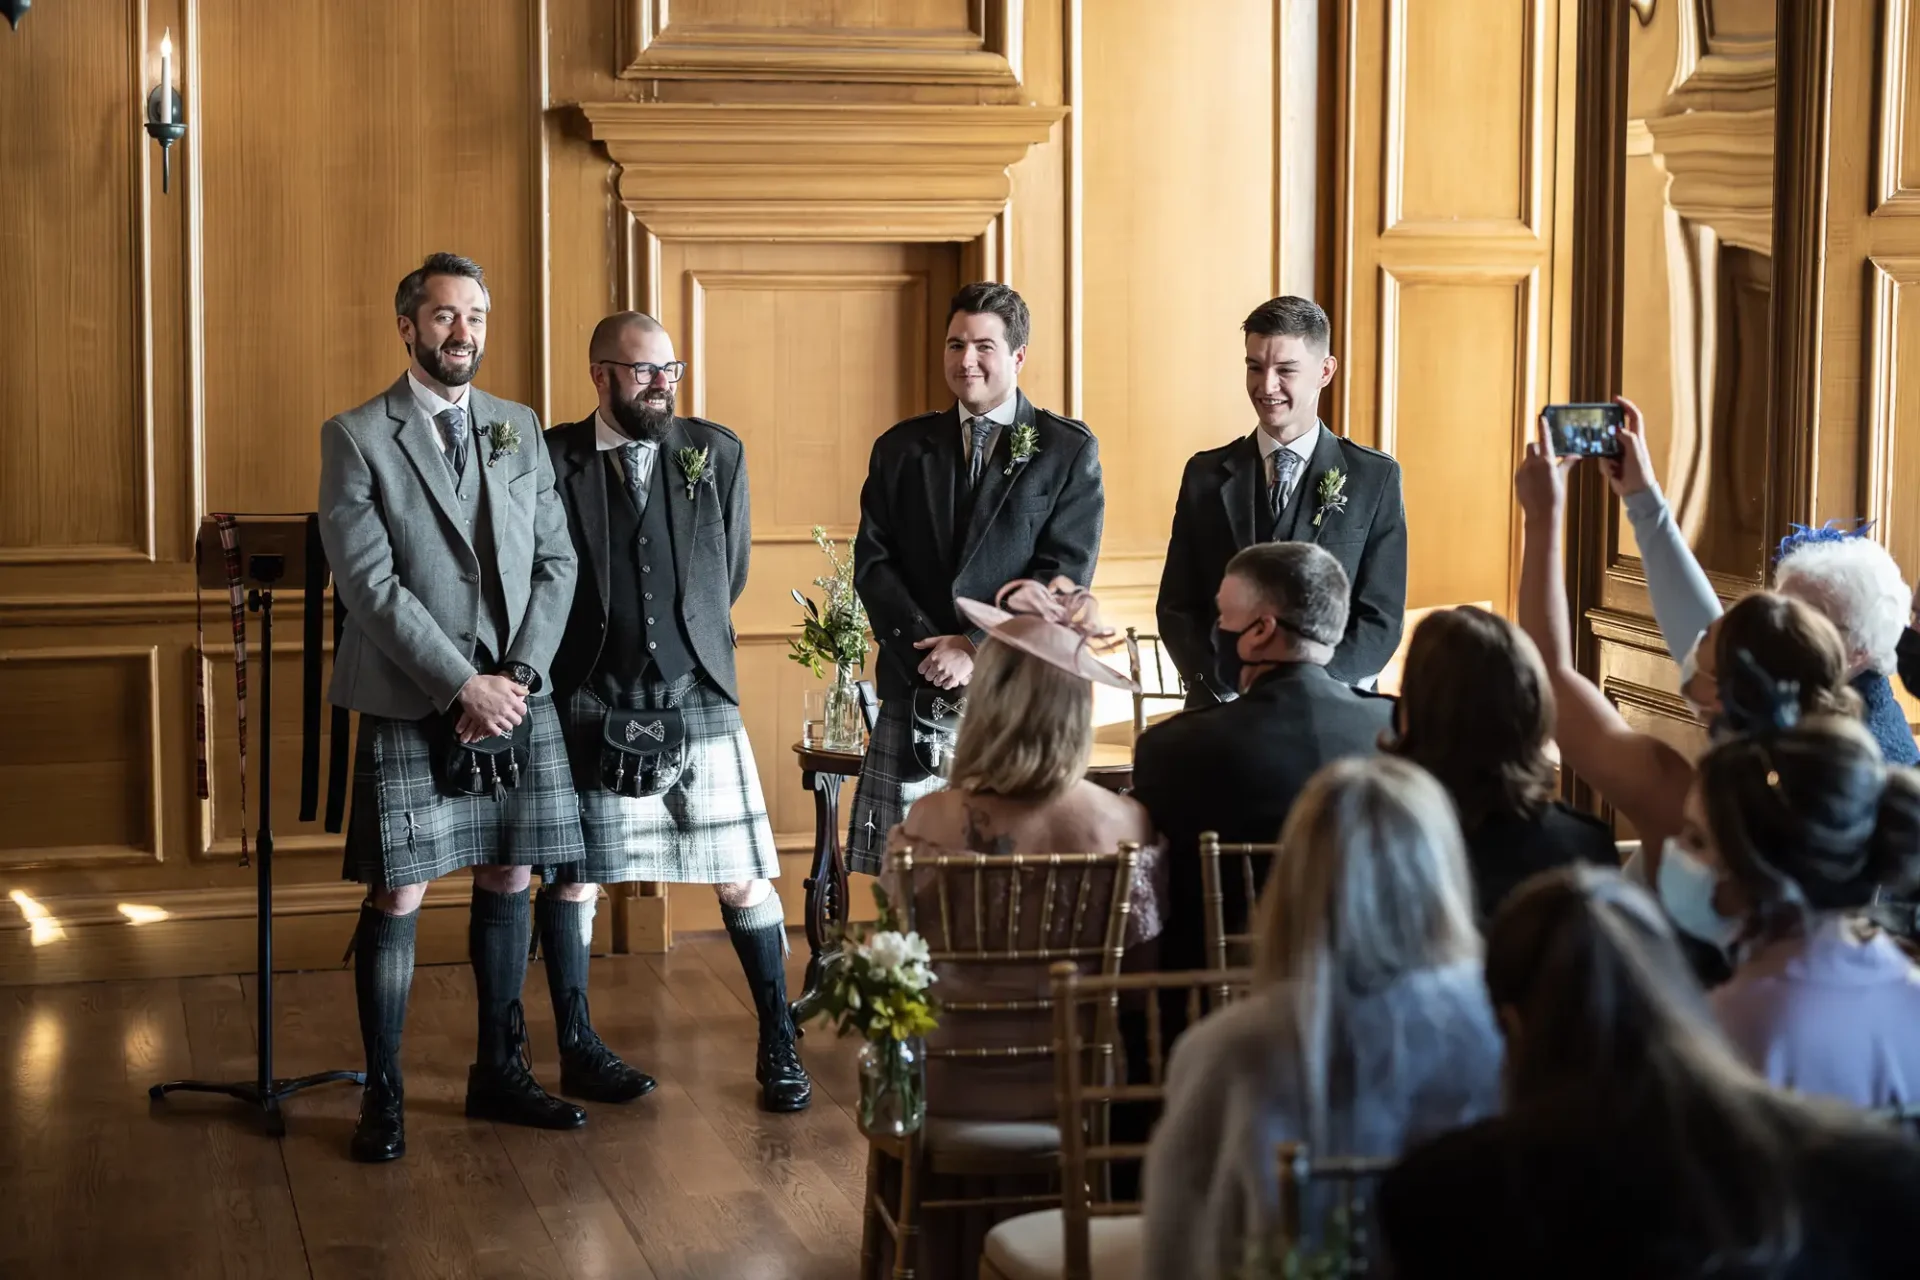 Four men in kilts and jackets stand at the front of a room during a wedding ceremony, with guests seated and watching.